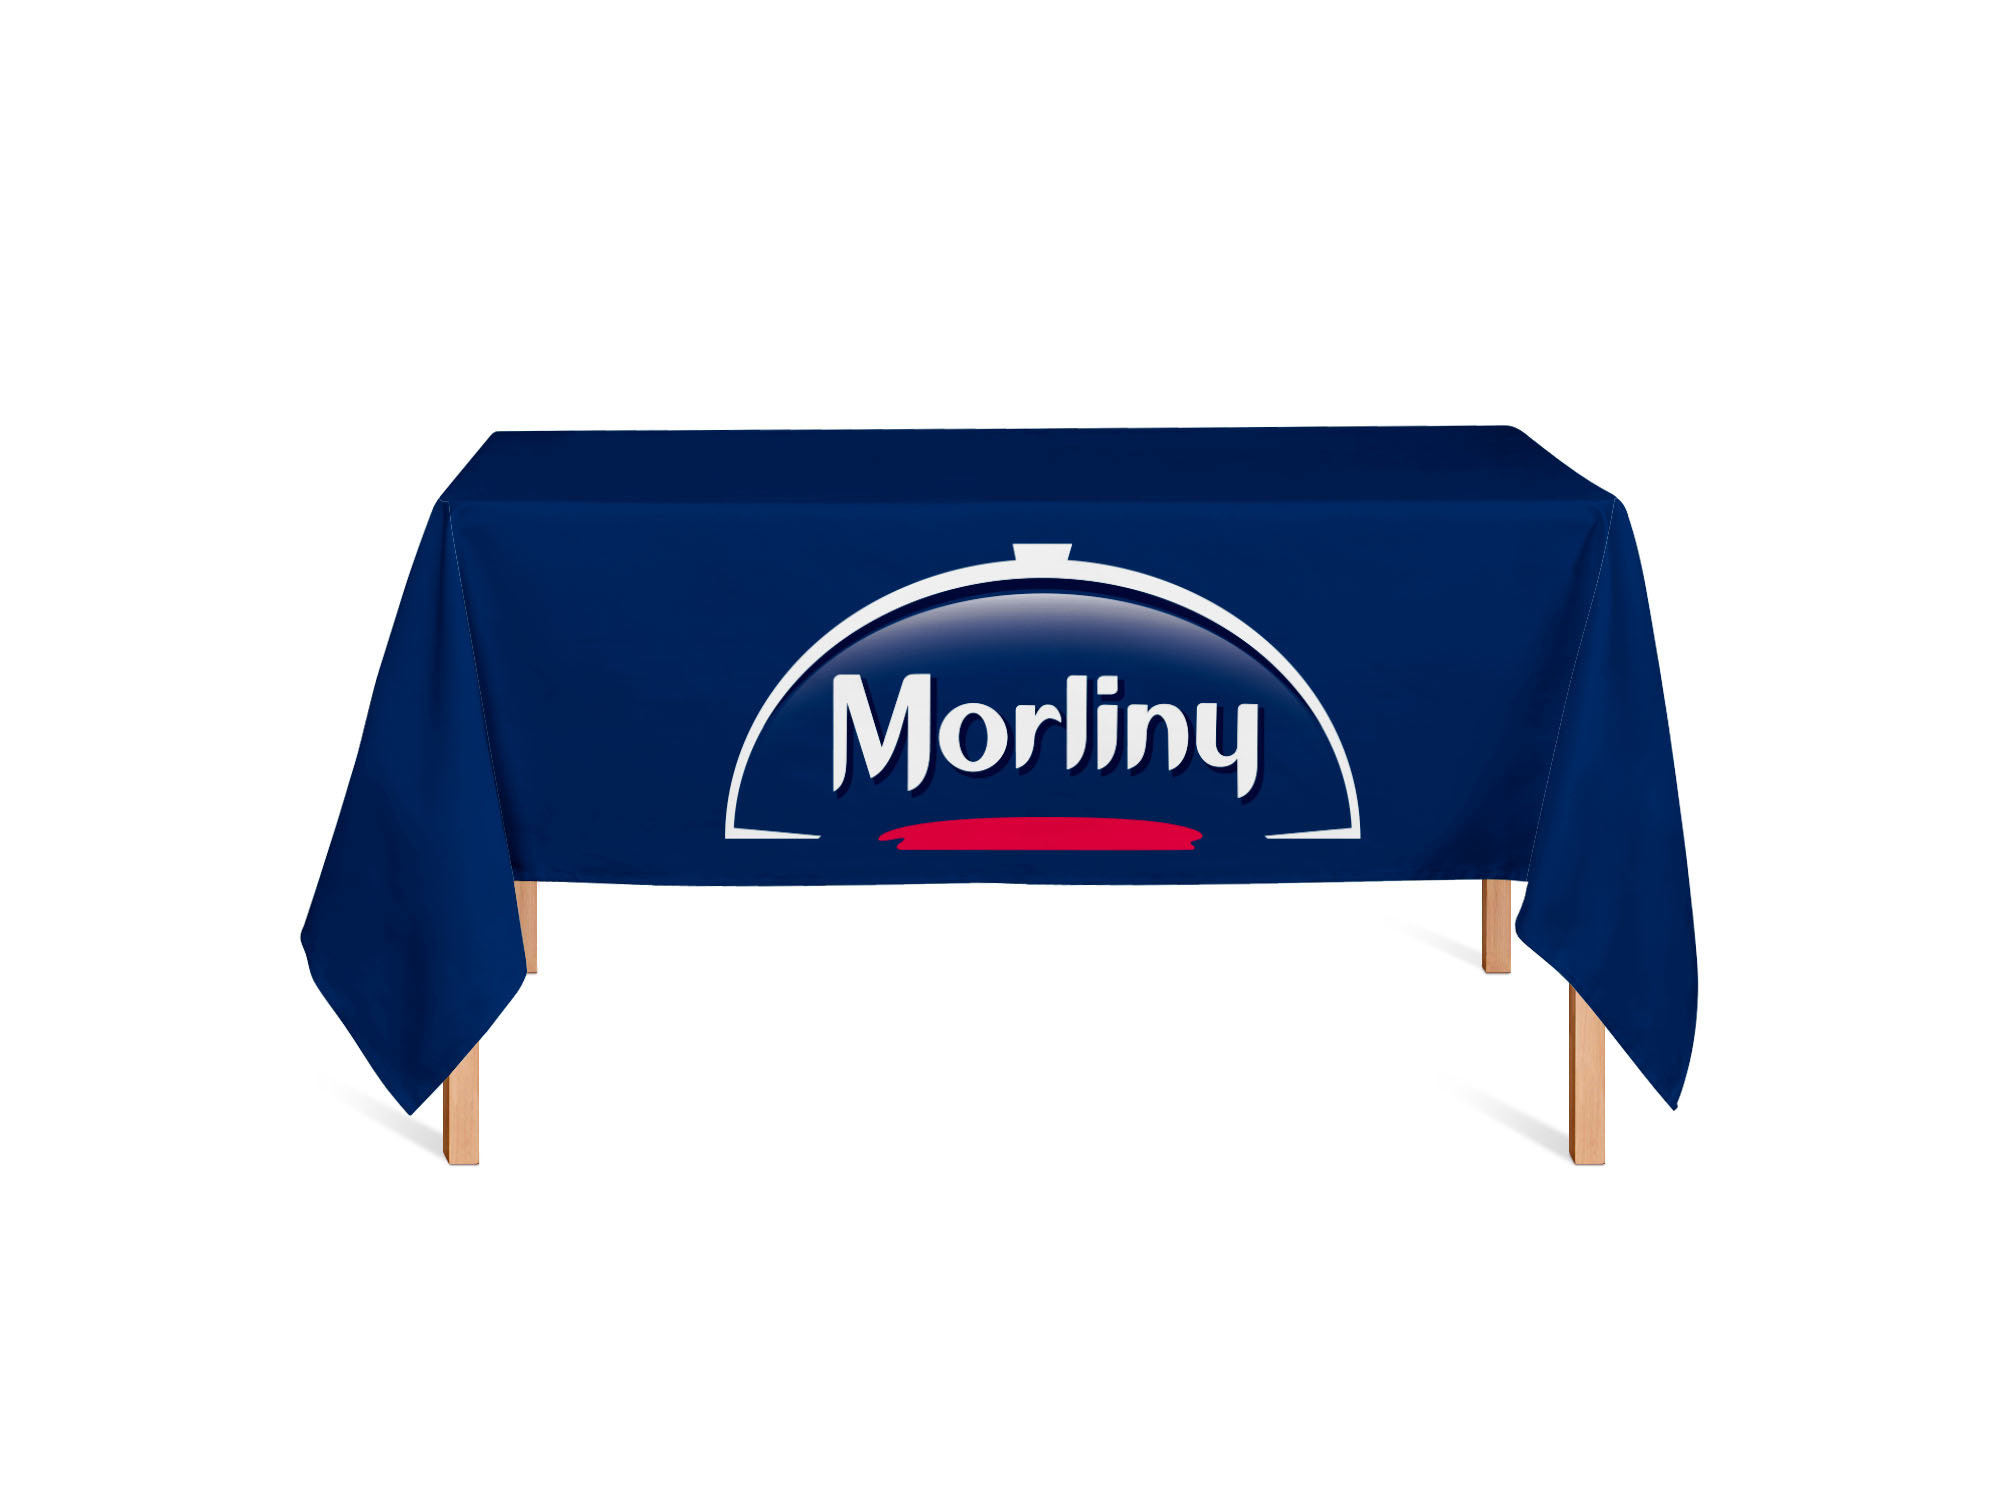 Custom Printed Tablecloth  Printing UK, Next Day Delivery - www.ontimeprint.co.uk